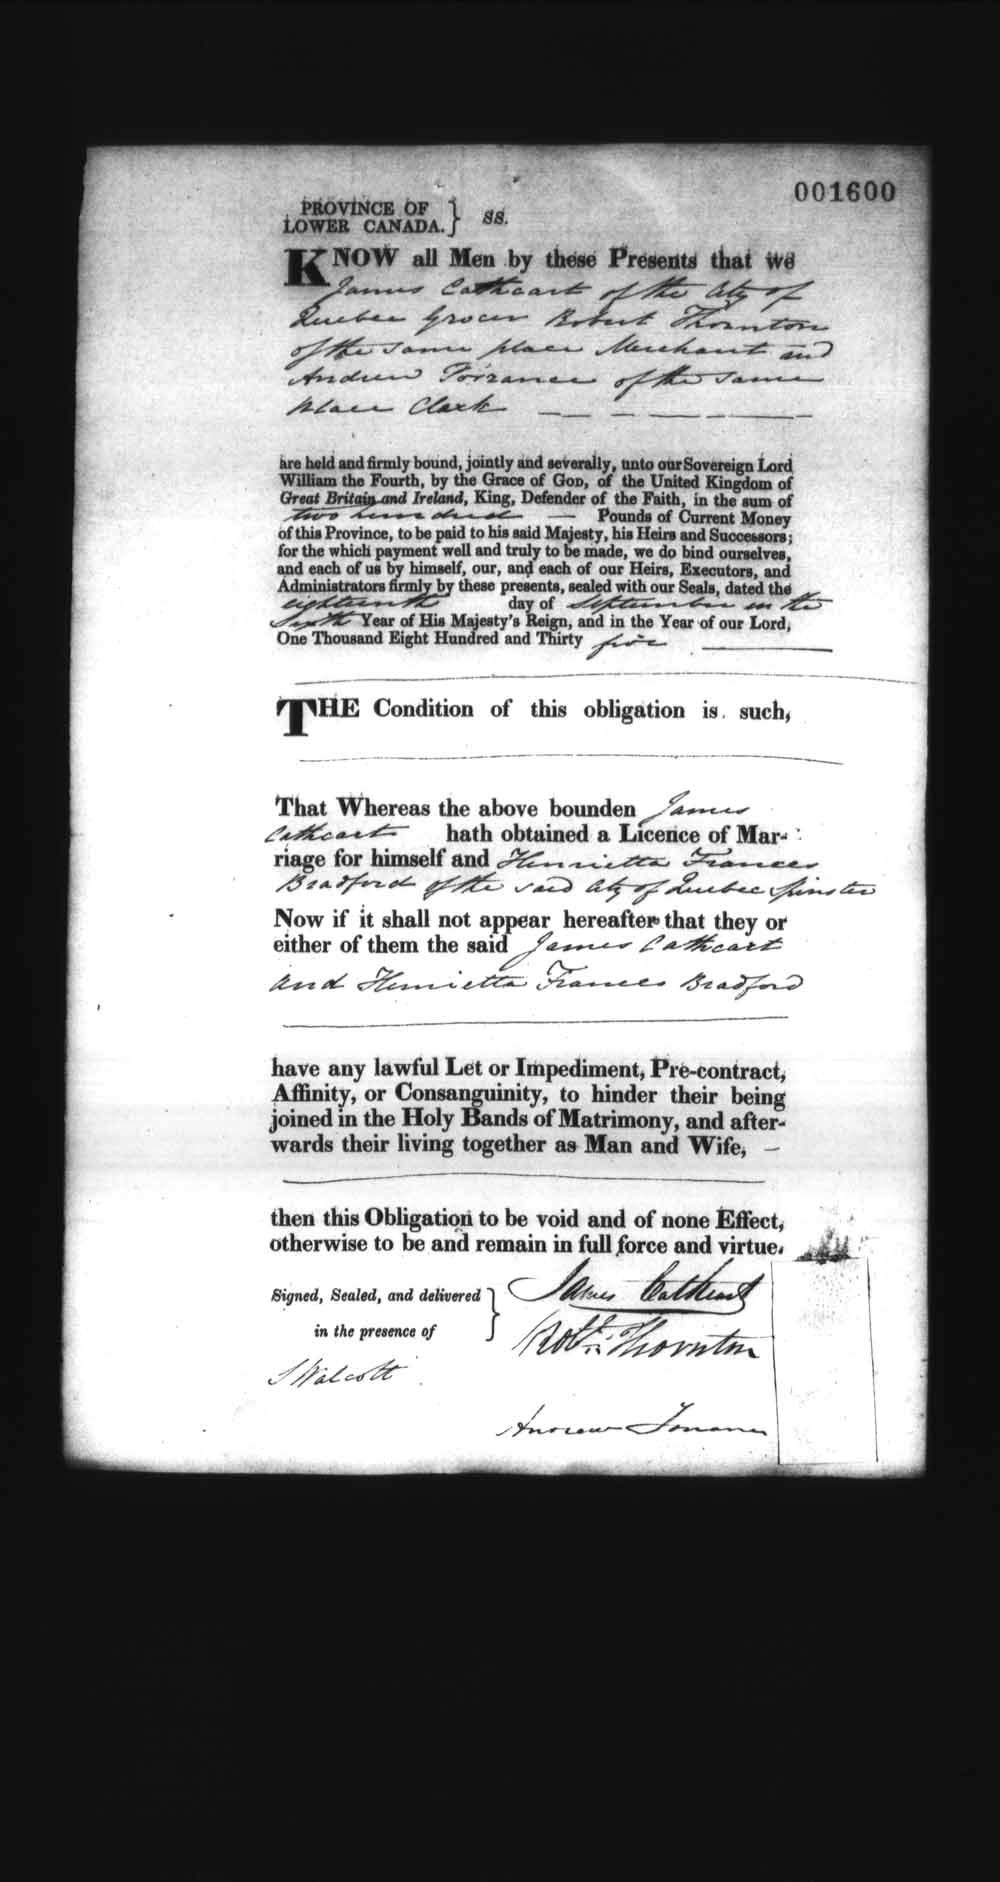 Digitized page of Upper and Lower Canada Marriage Bonds (1779-1865) for Image No.: e008237921